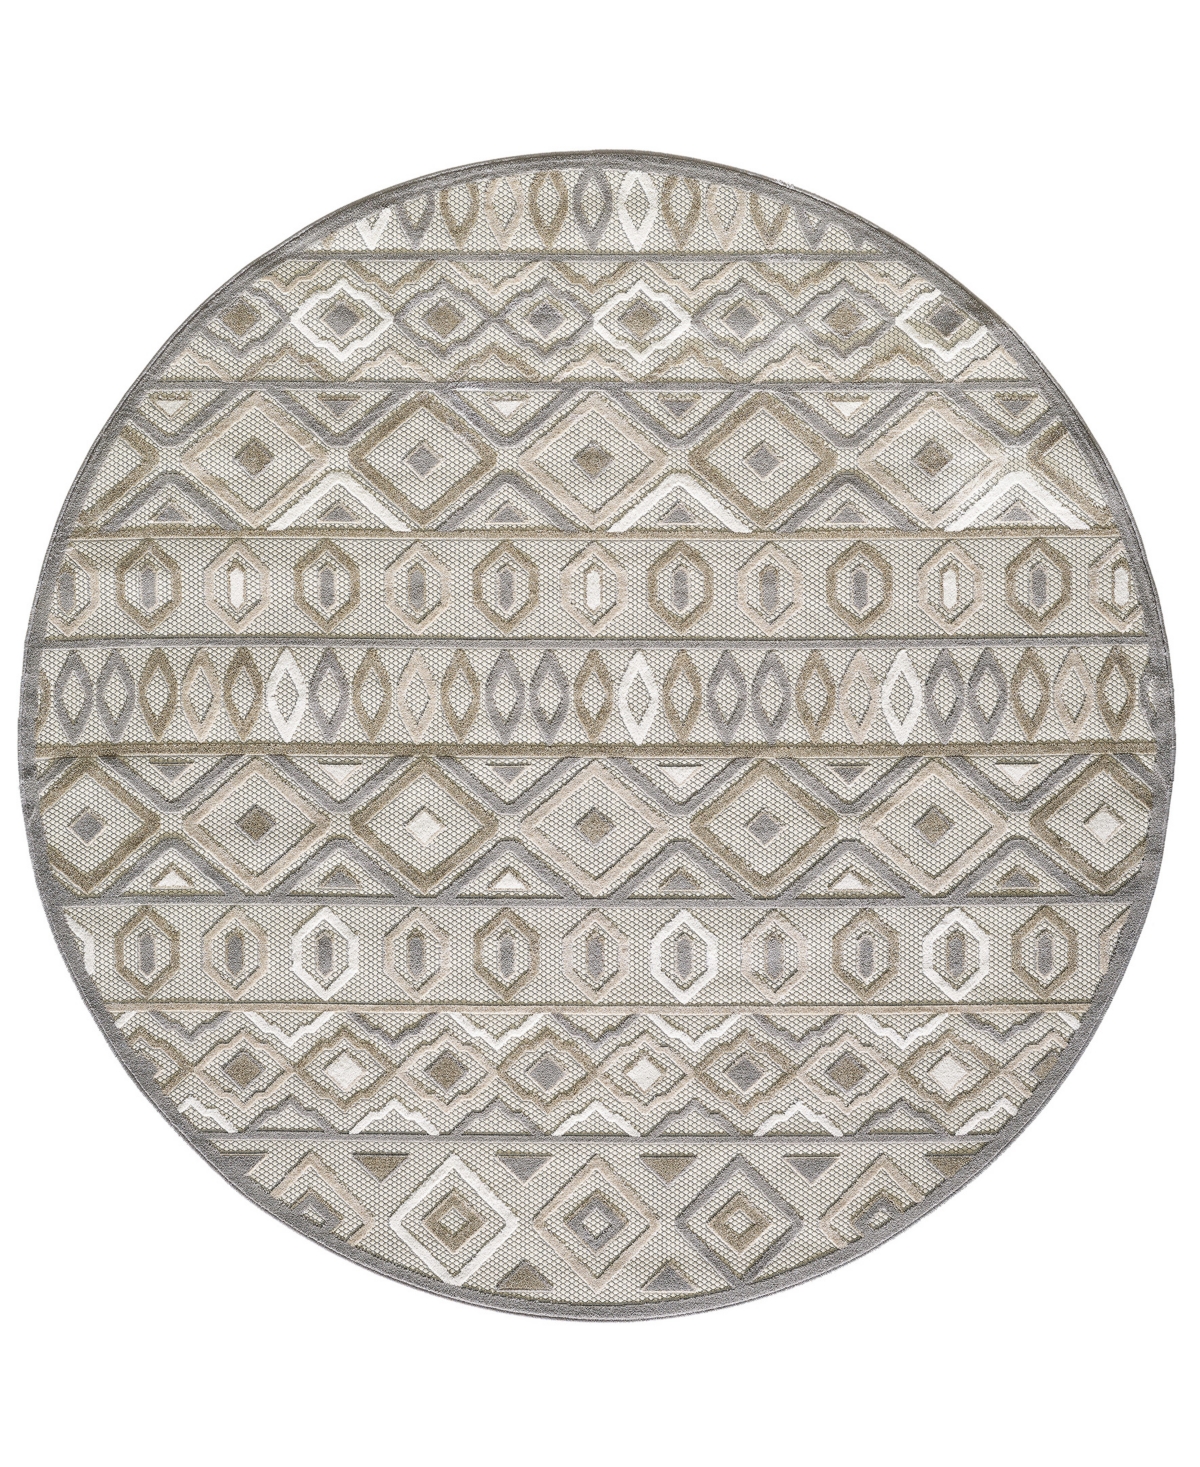 Kas Calla 6925 7'10in x 7'10in Round Area Rug - Gray